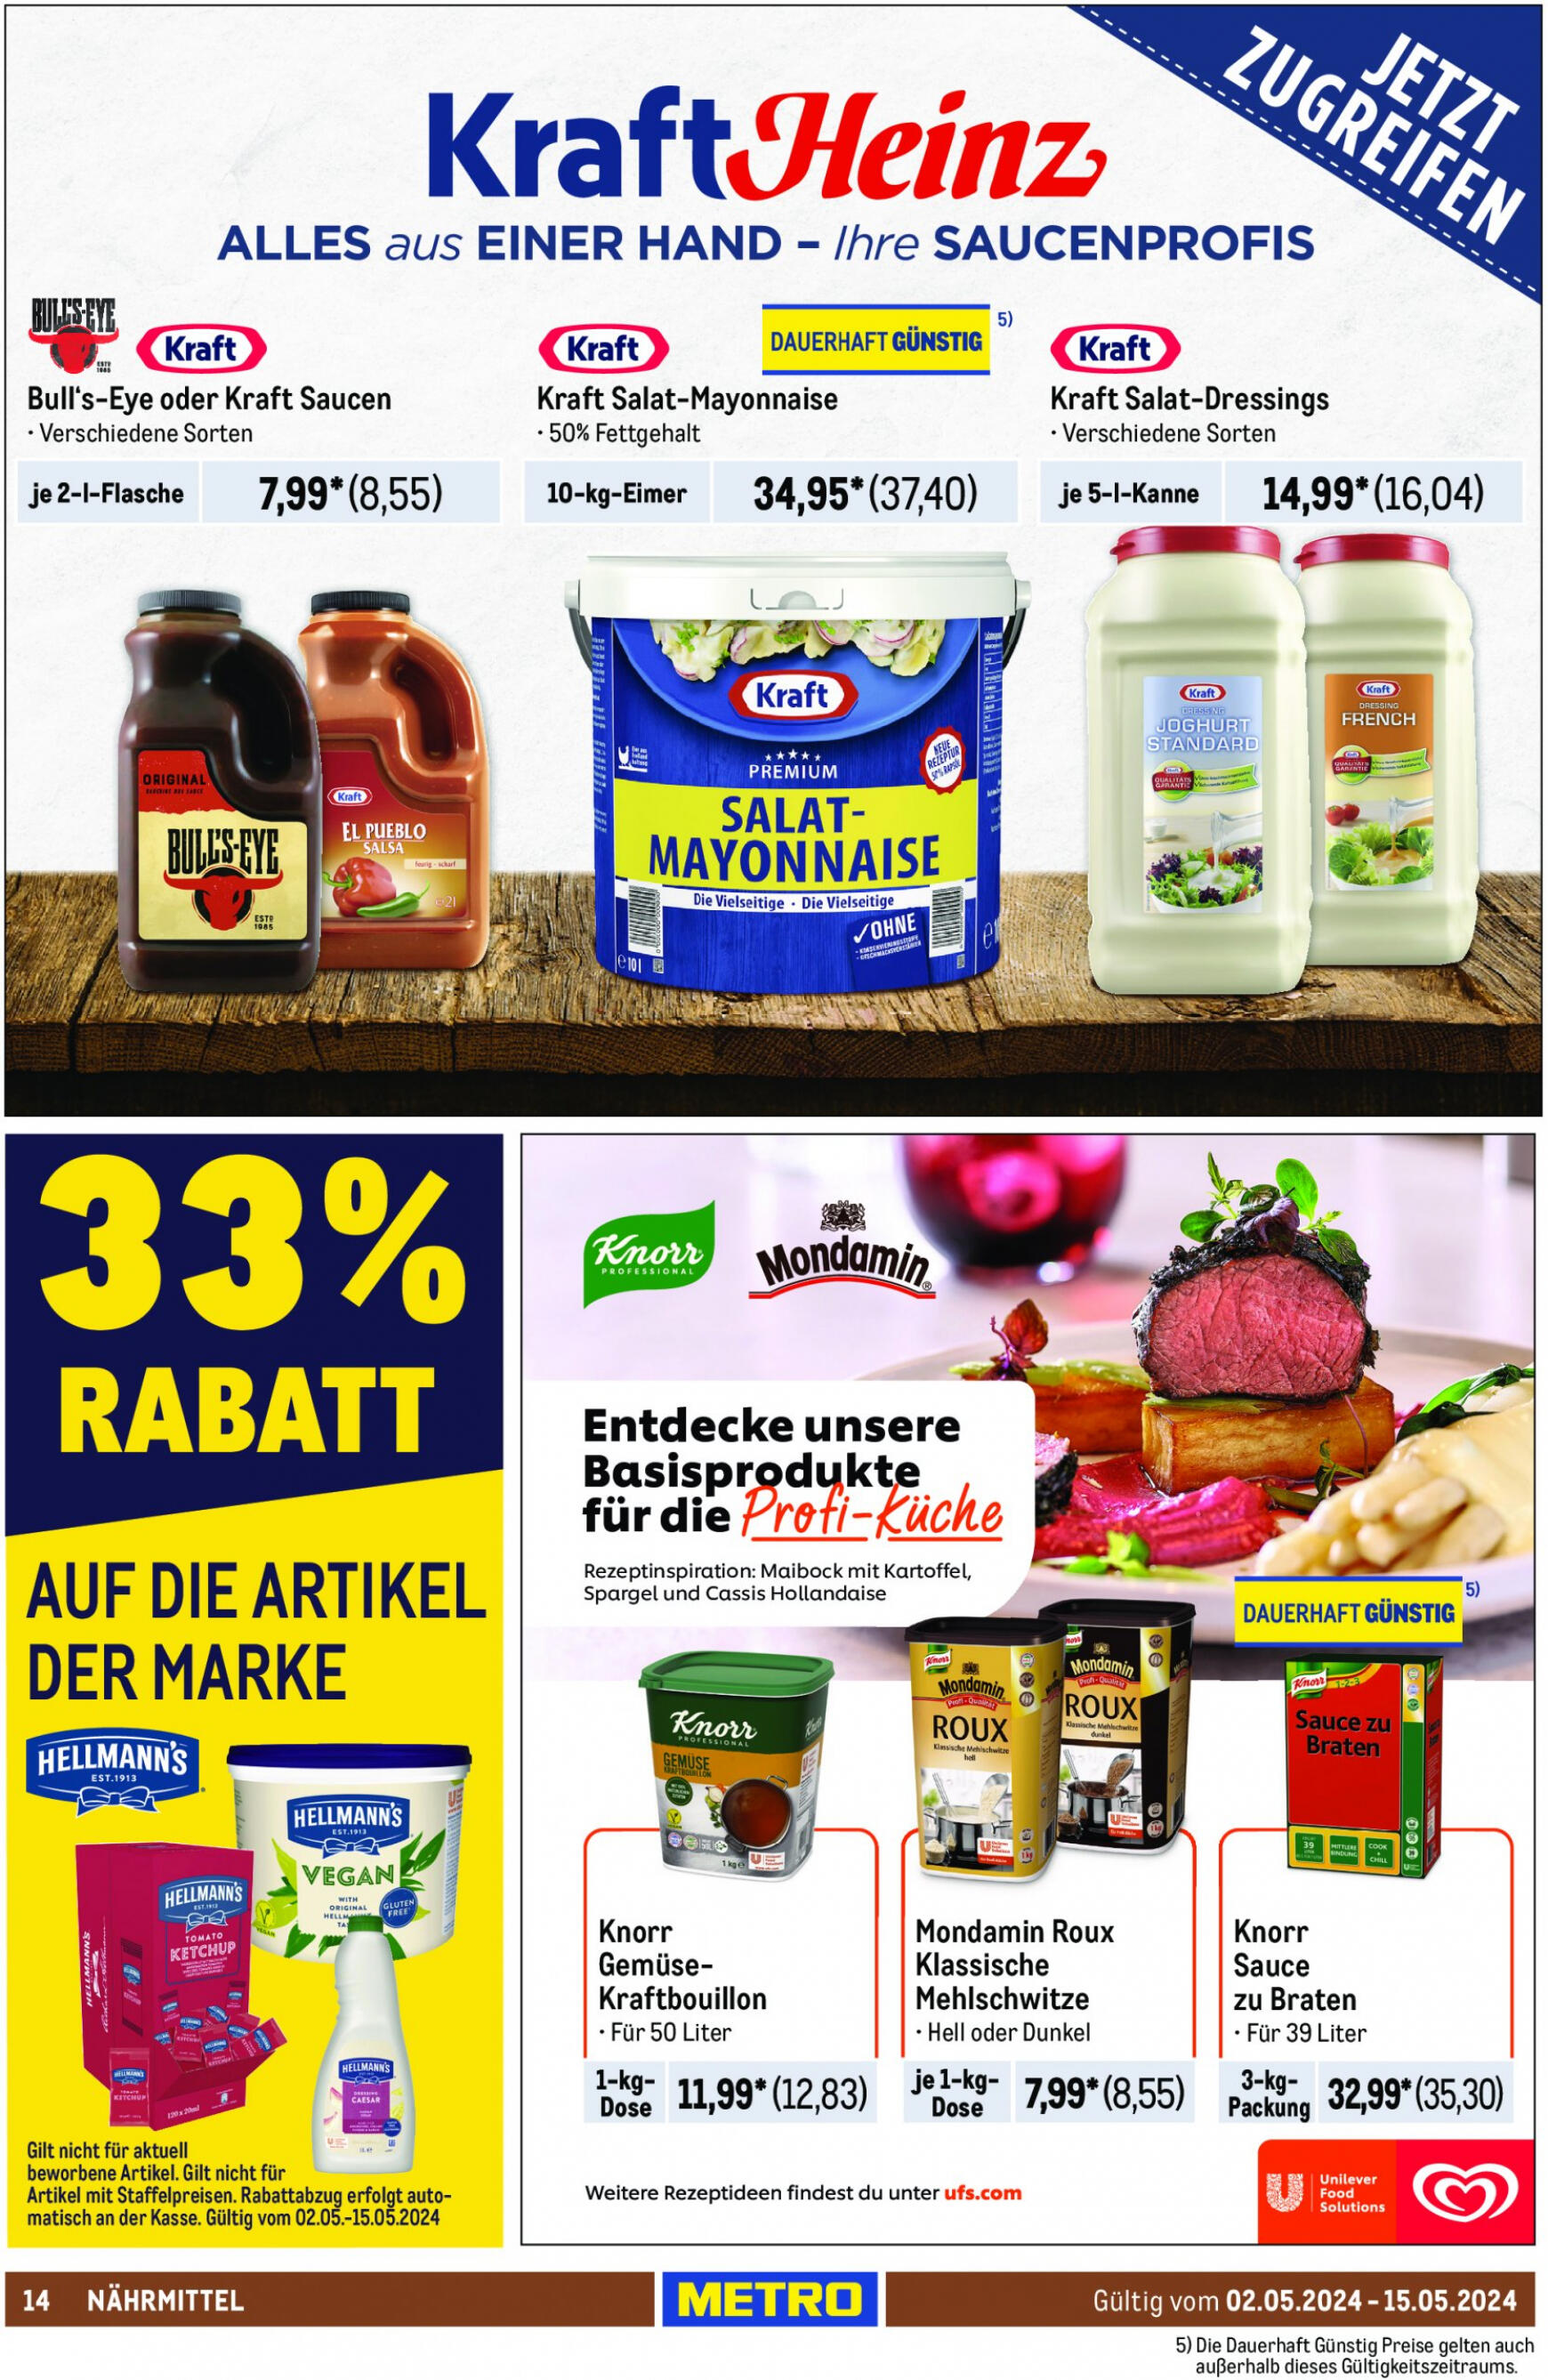 metro - Flyer Metro - GastroJournal aktuell 02.05. - 15.05. - page: 16